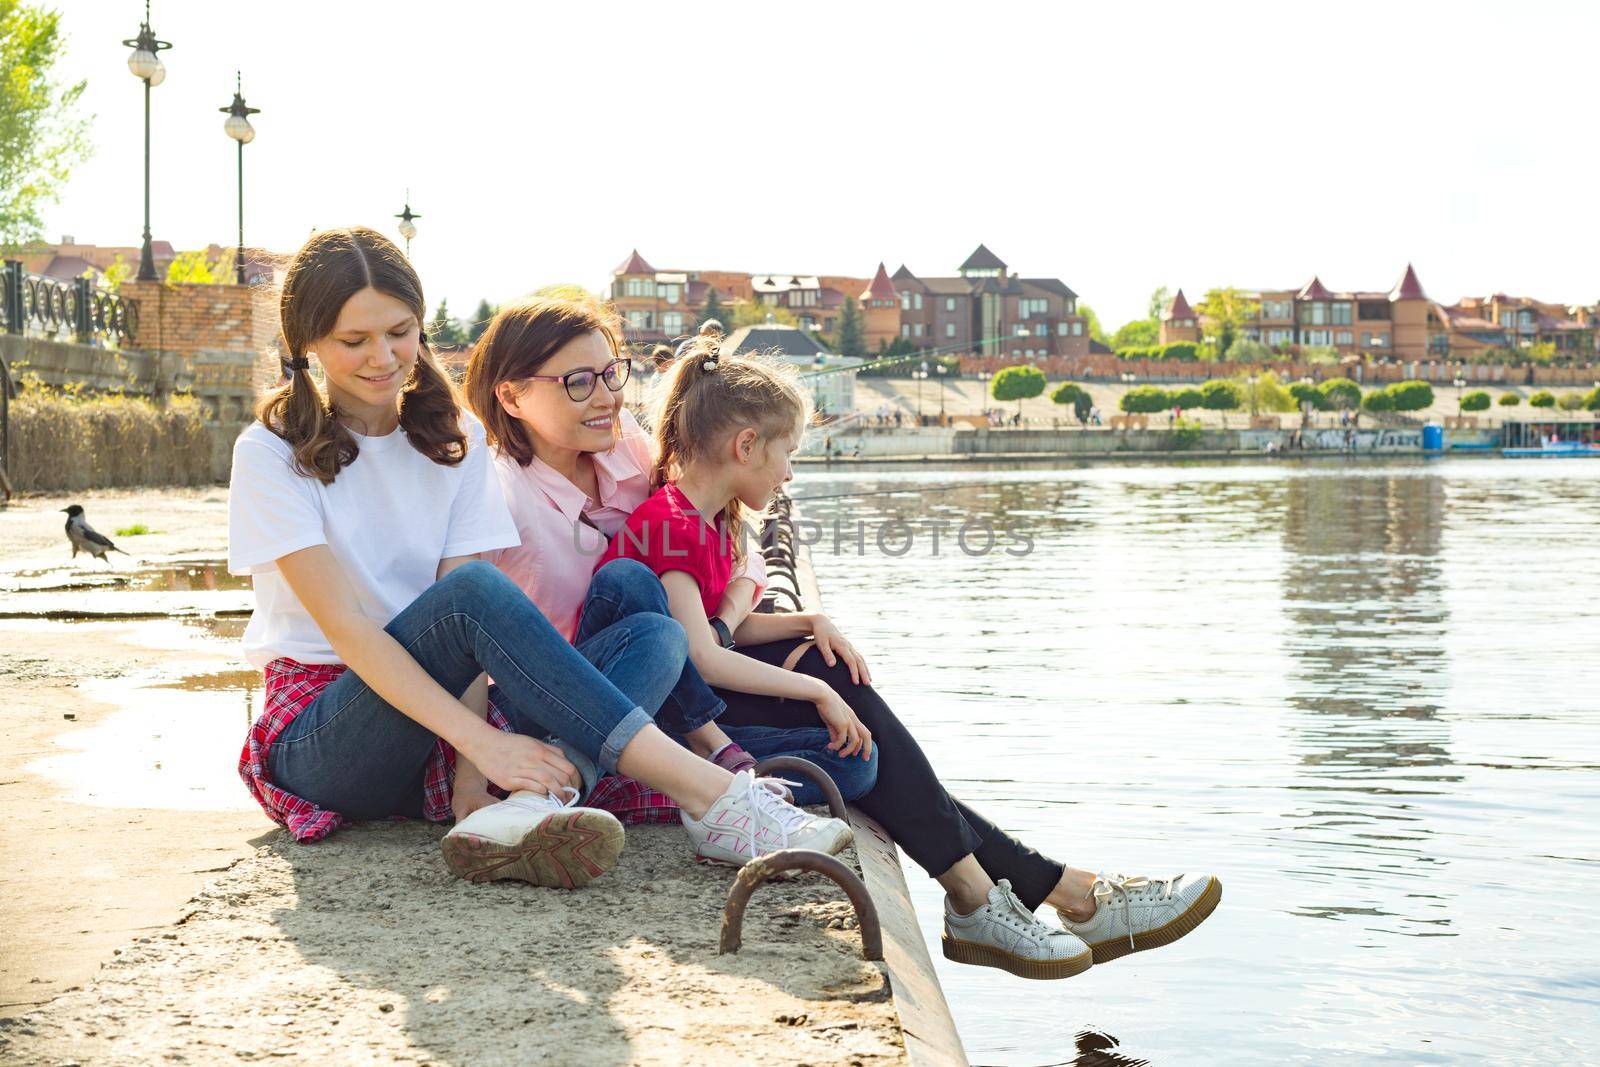 Outdoors portrait of mother and two daughters. Watching the water. Background nature, park, river.